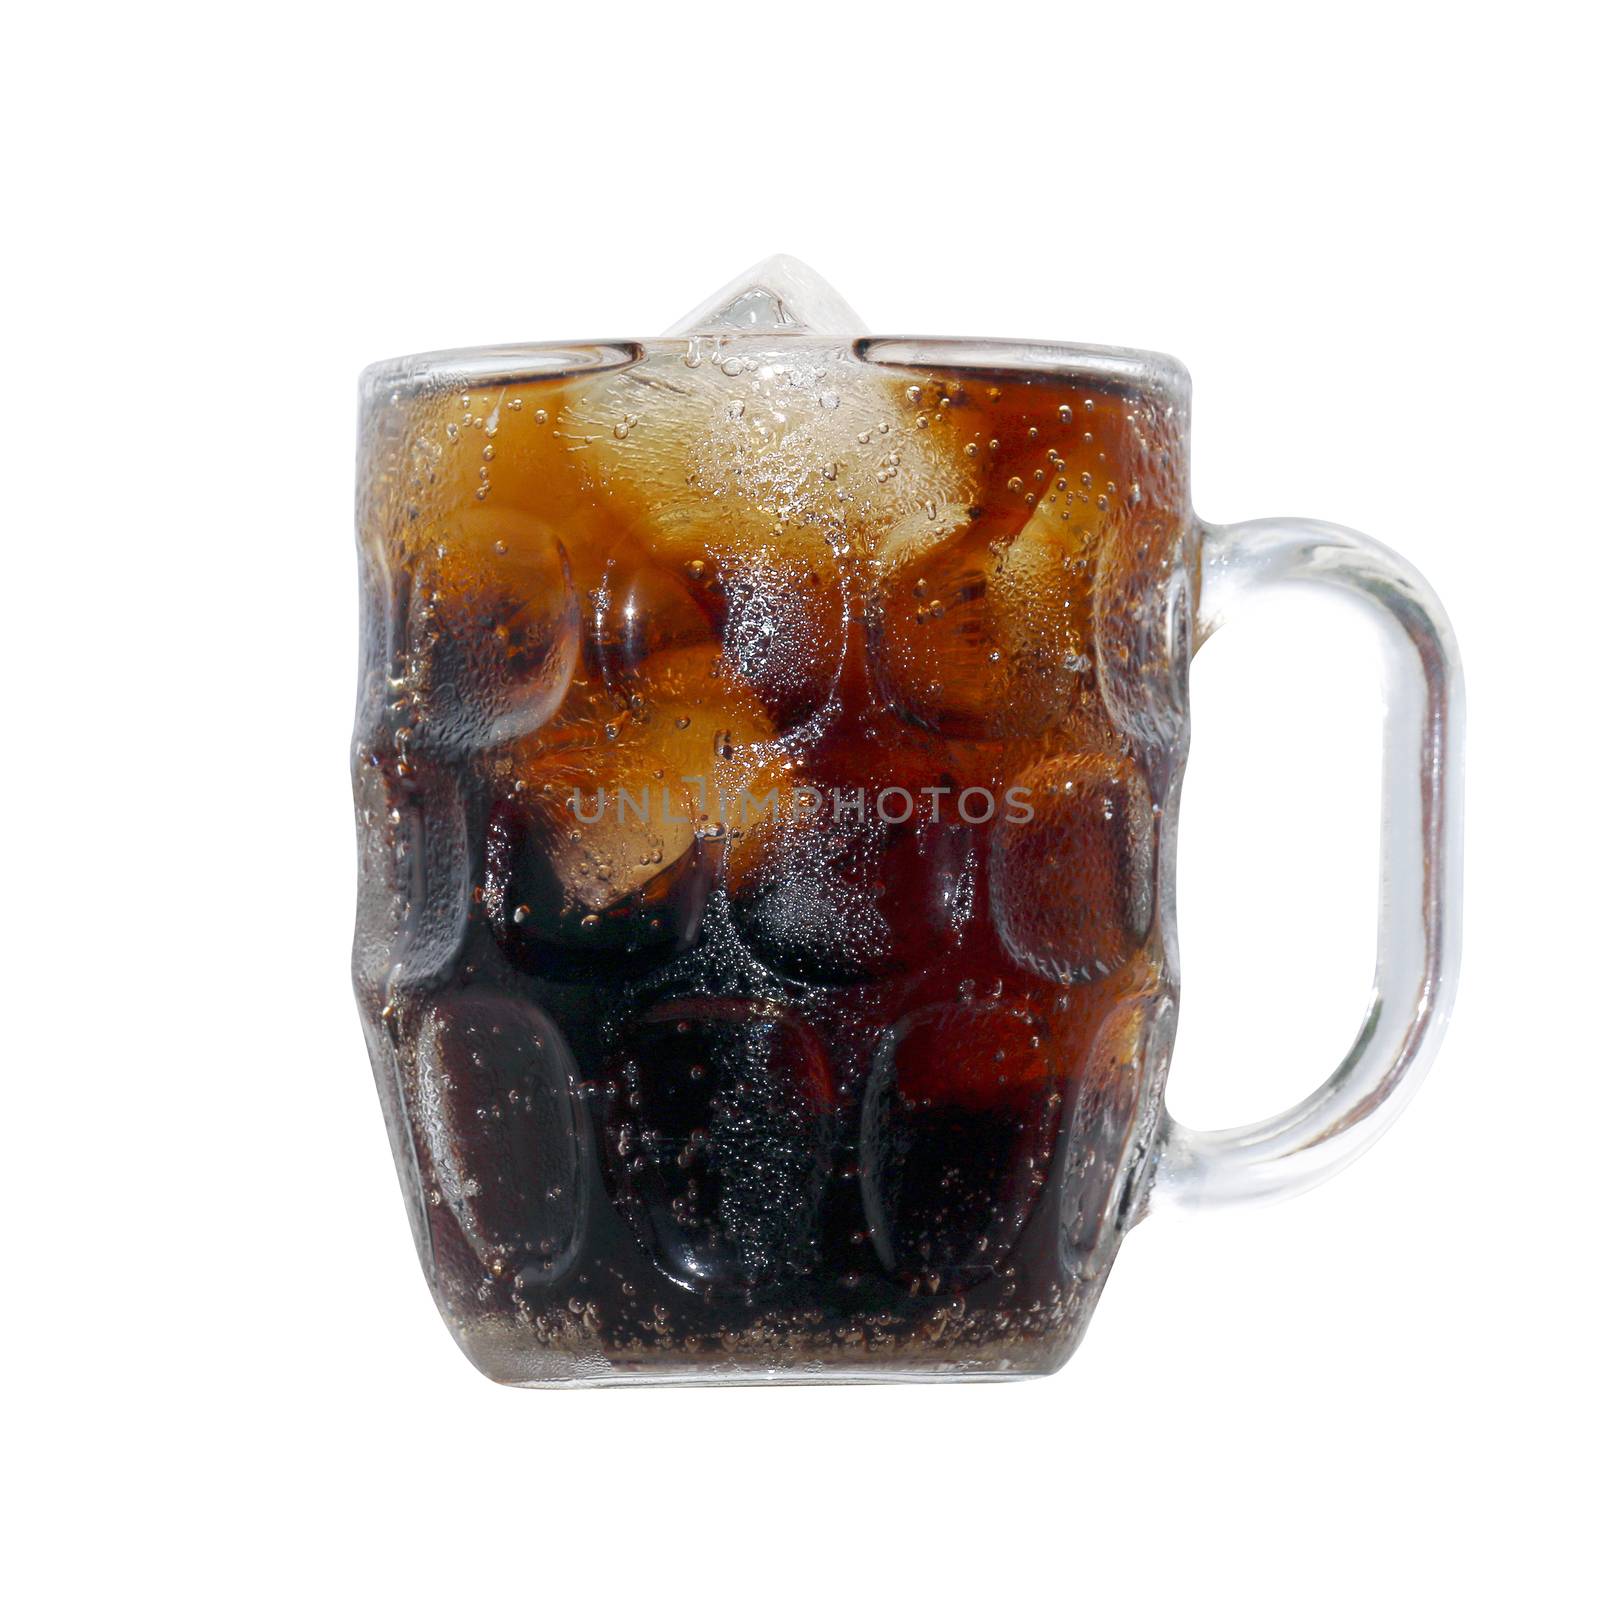 black cola soda in glass with ice cubes for refreshments feel, beverage cola and cubes ice refreshing cool in glass isolated on white background by cgdeaw